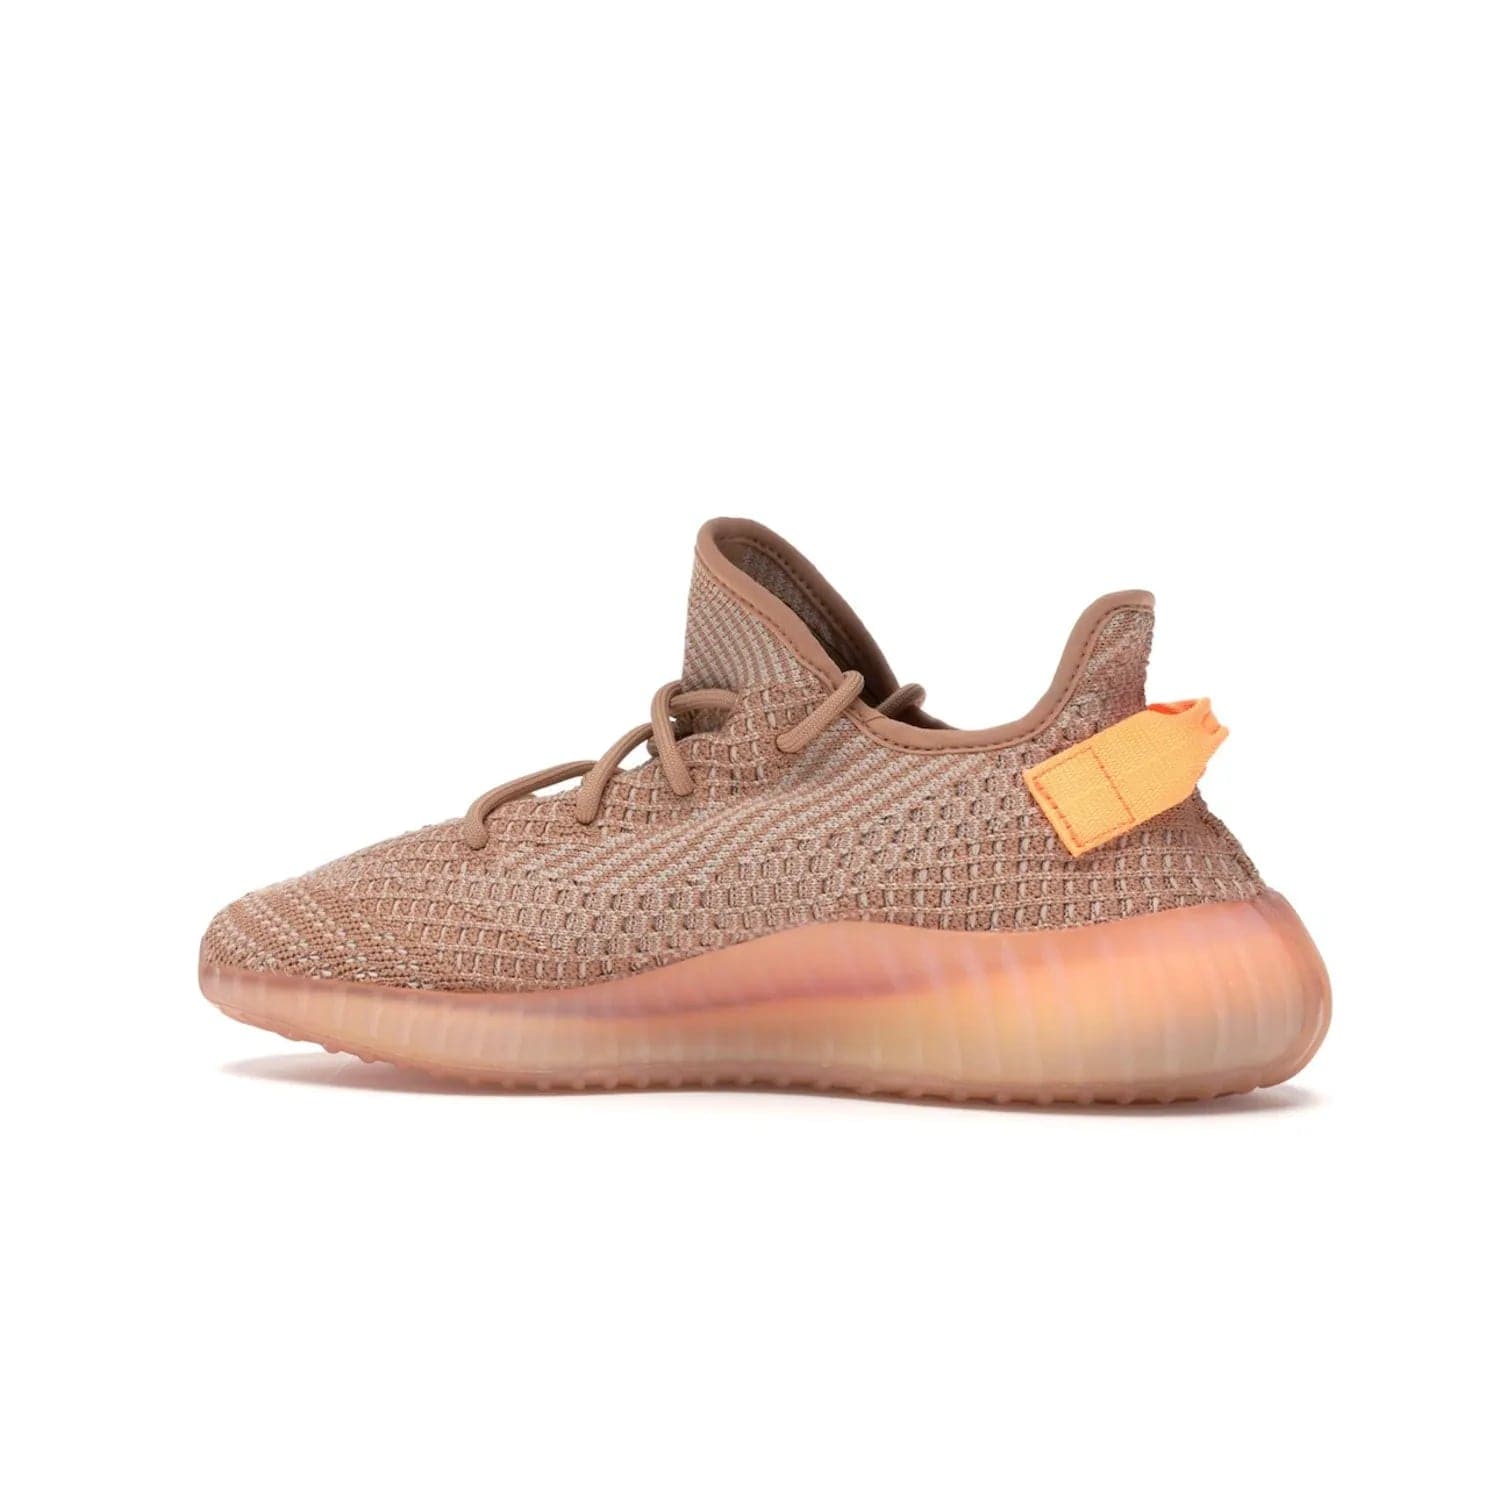 adidas Yeezy Boost 350 V2 Clay - Image 21 - Only at www.BallersClubKickz.com - The adidas Yeezy Boost 350 V2 Clay - style and swag in one shoe. Orange accents, clay midsole and sole. Get yours today!